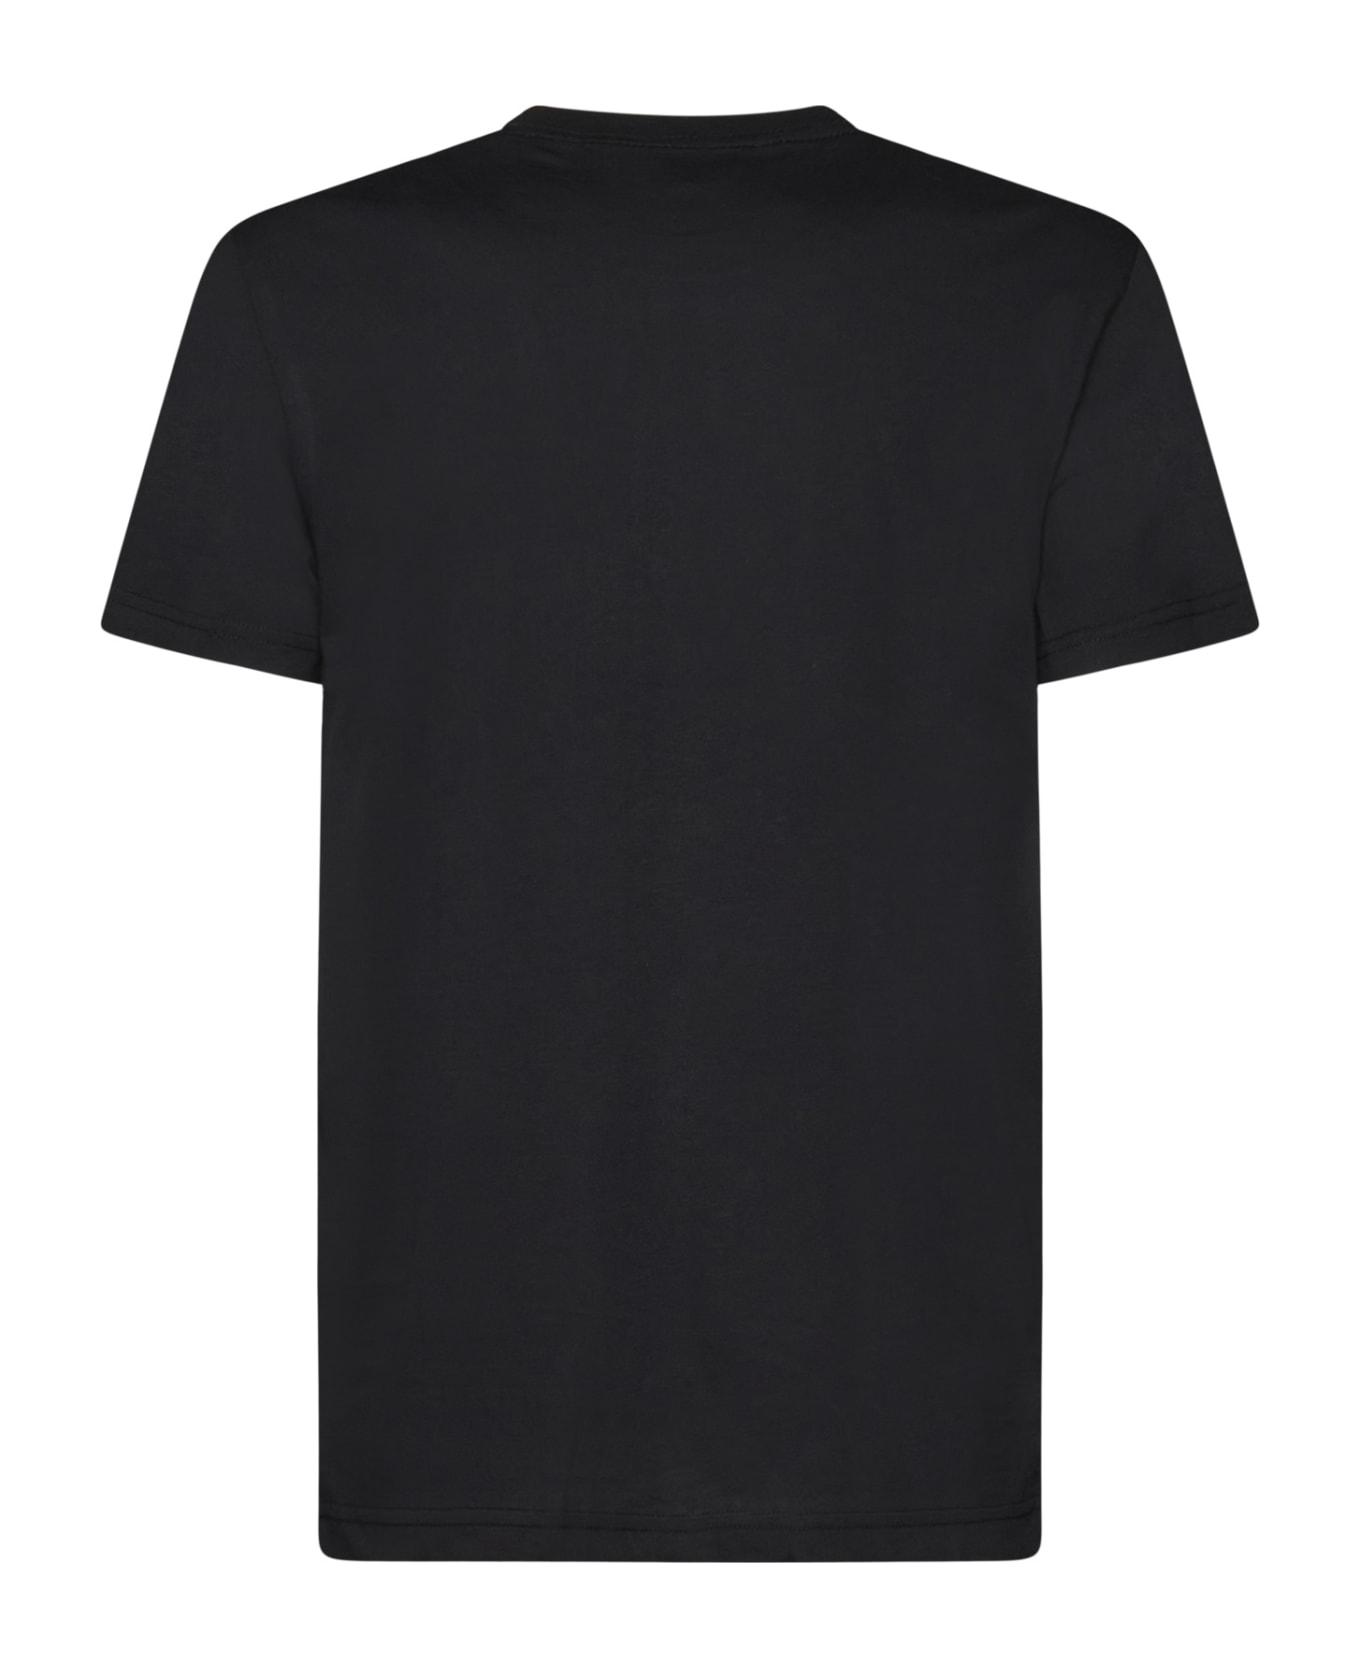 Versace Jeans Couture Logoed T-shirt - Black Gold